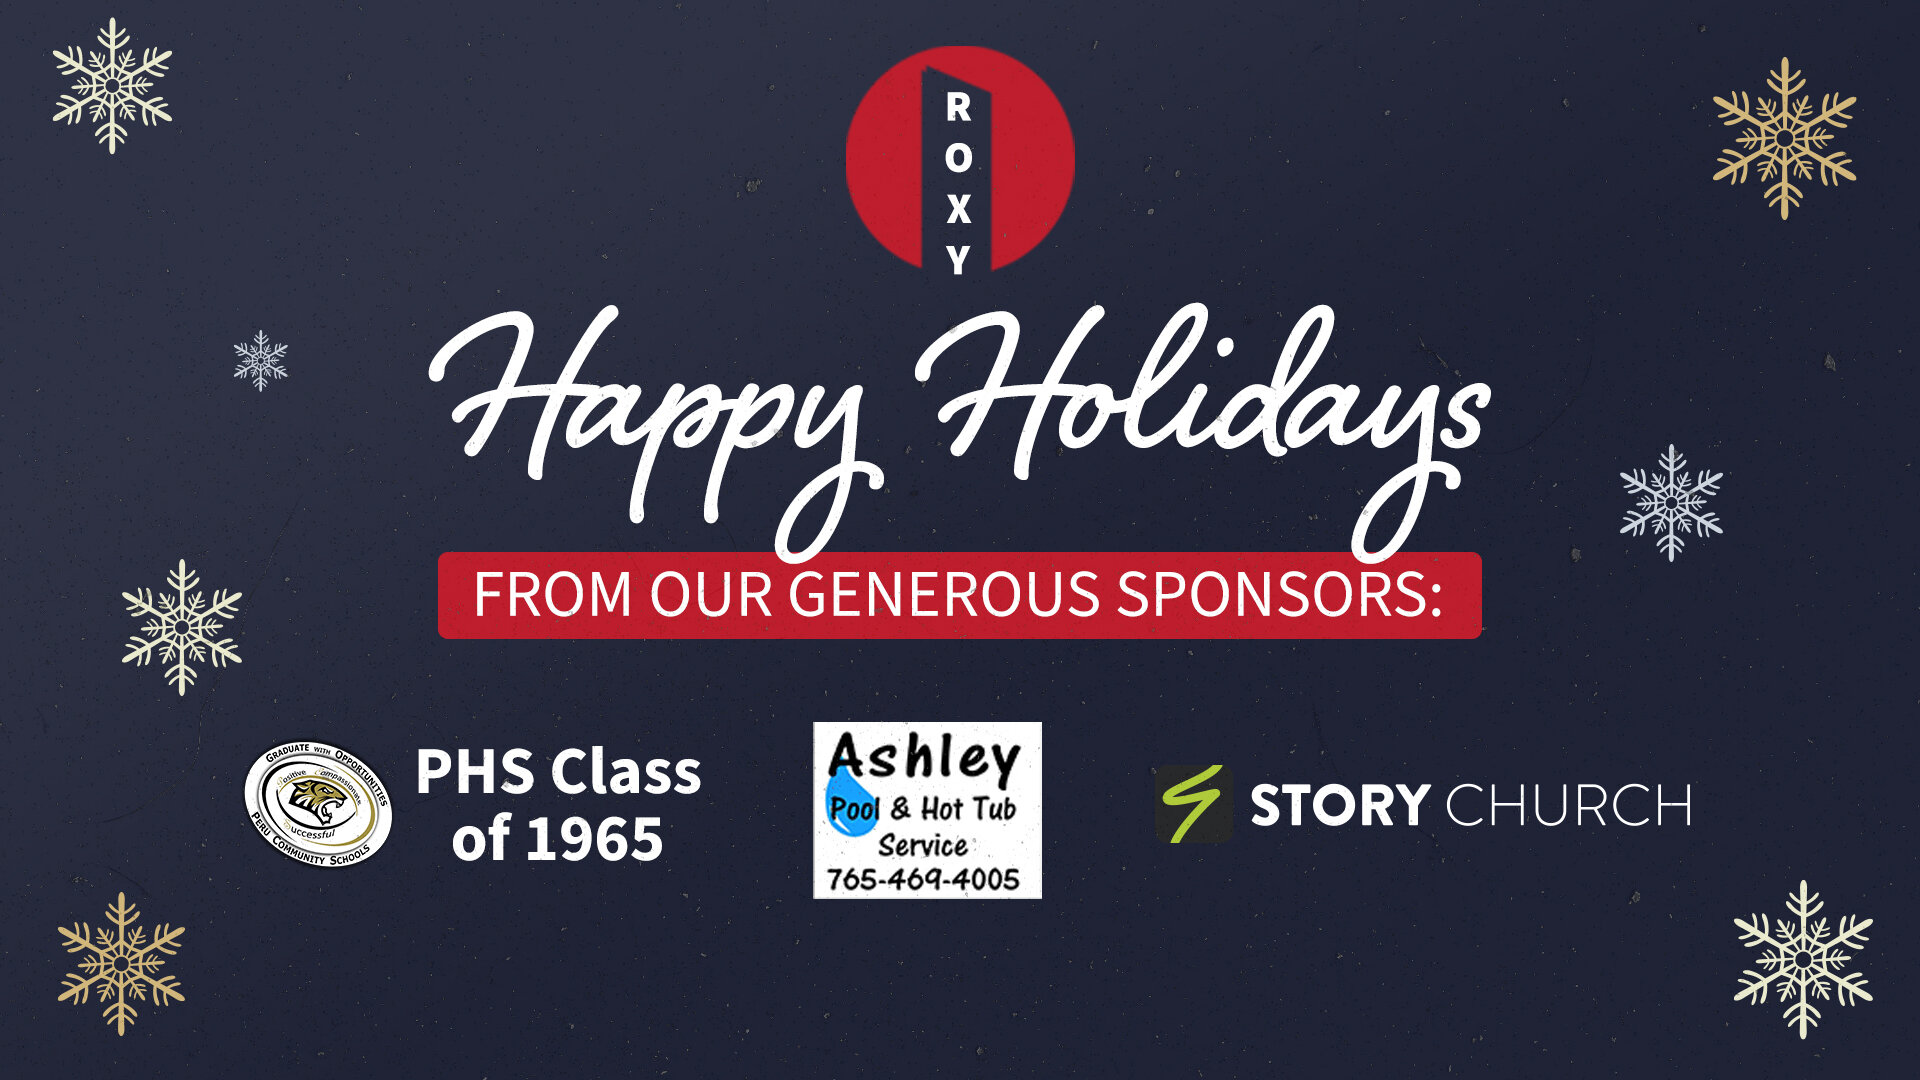 Our Free Christmas Movies series was brought to you this year a wonderfully generous group of people, The PHS Class of 1965, Ashley Pool and Hot Tub Service, and Story Church. They would like to wish everyone in our community a Happy Holiday! 

In tu